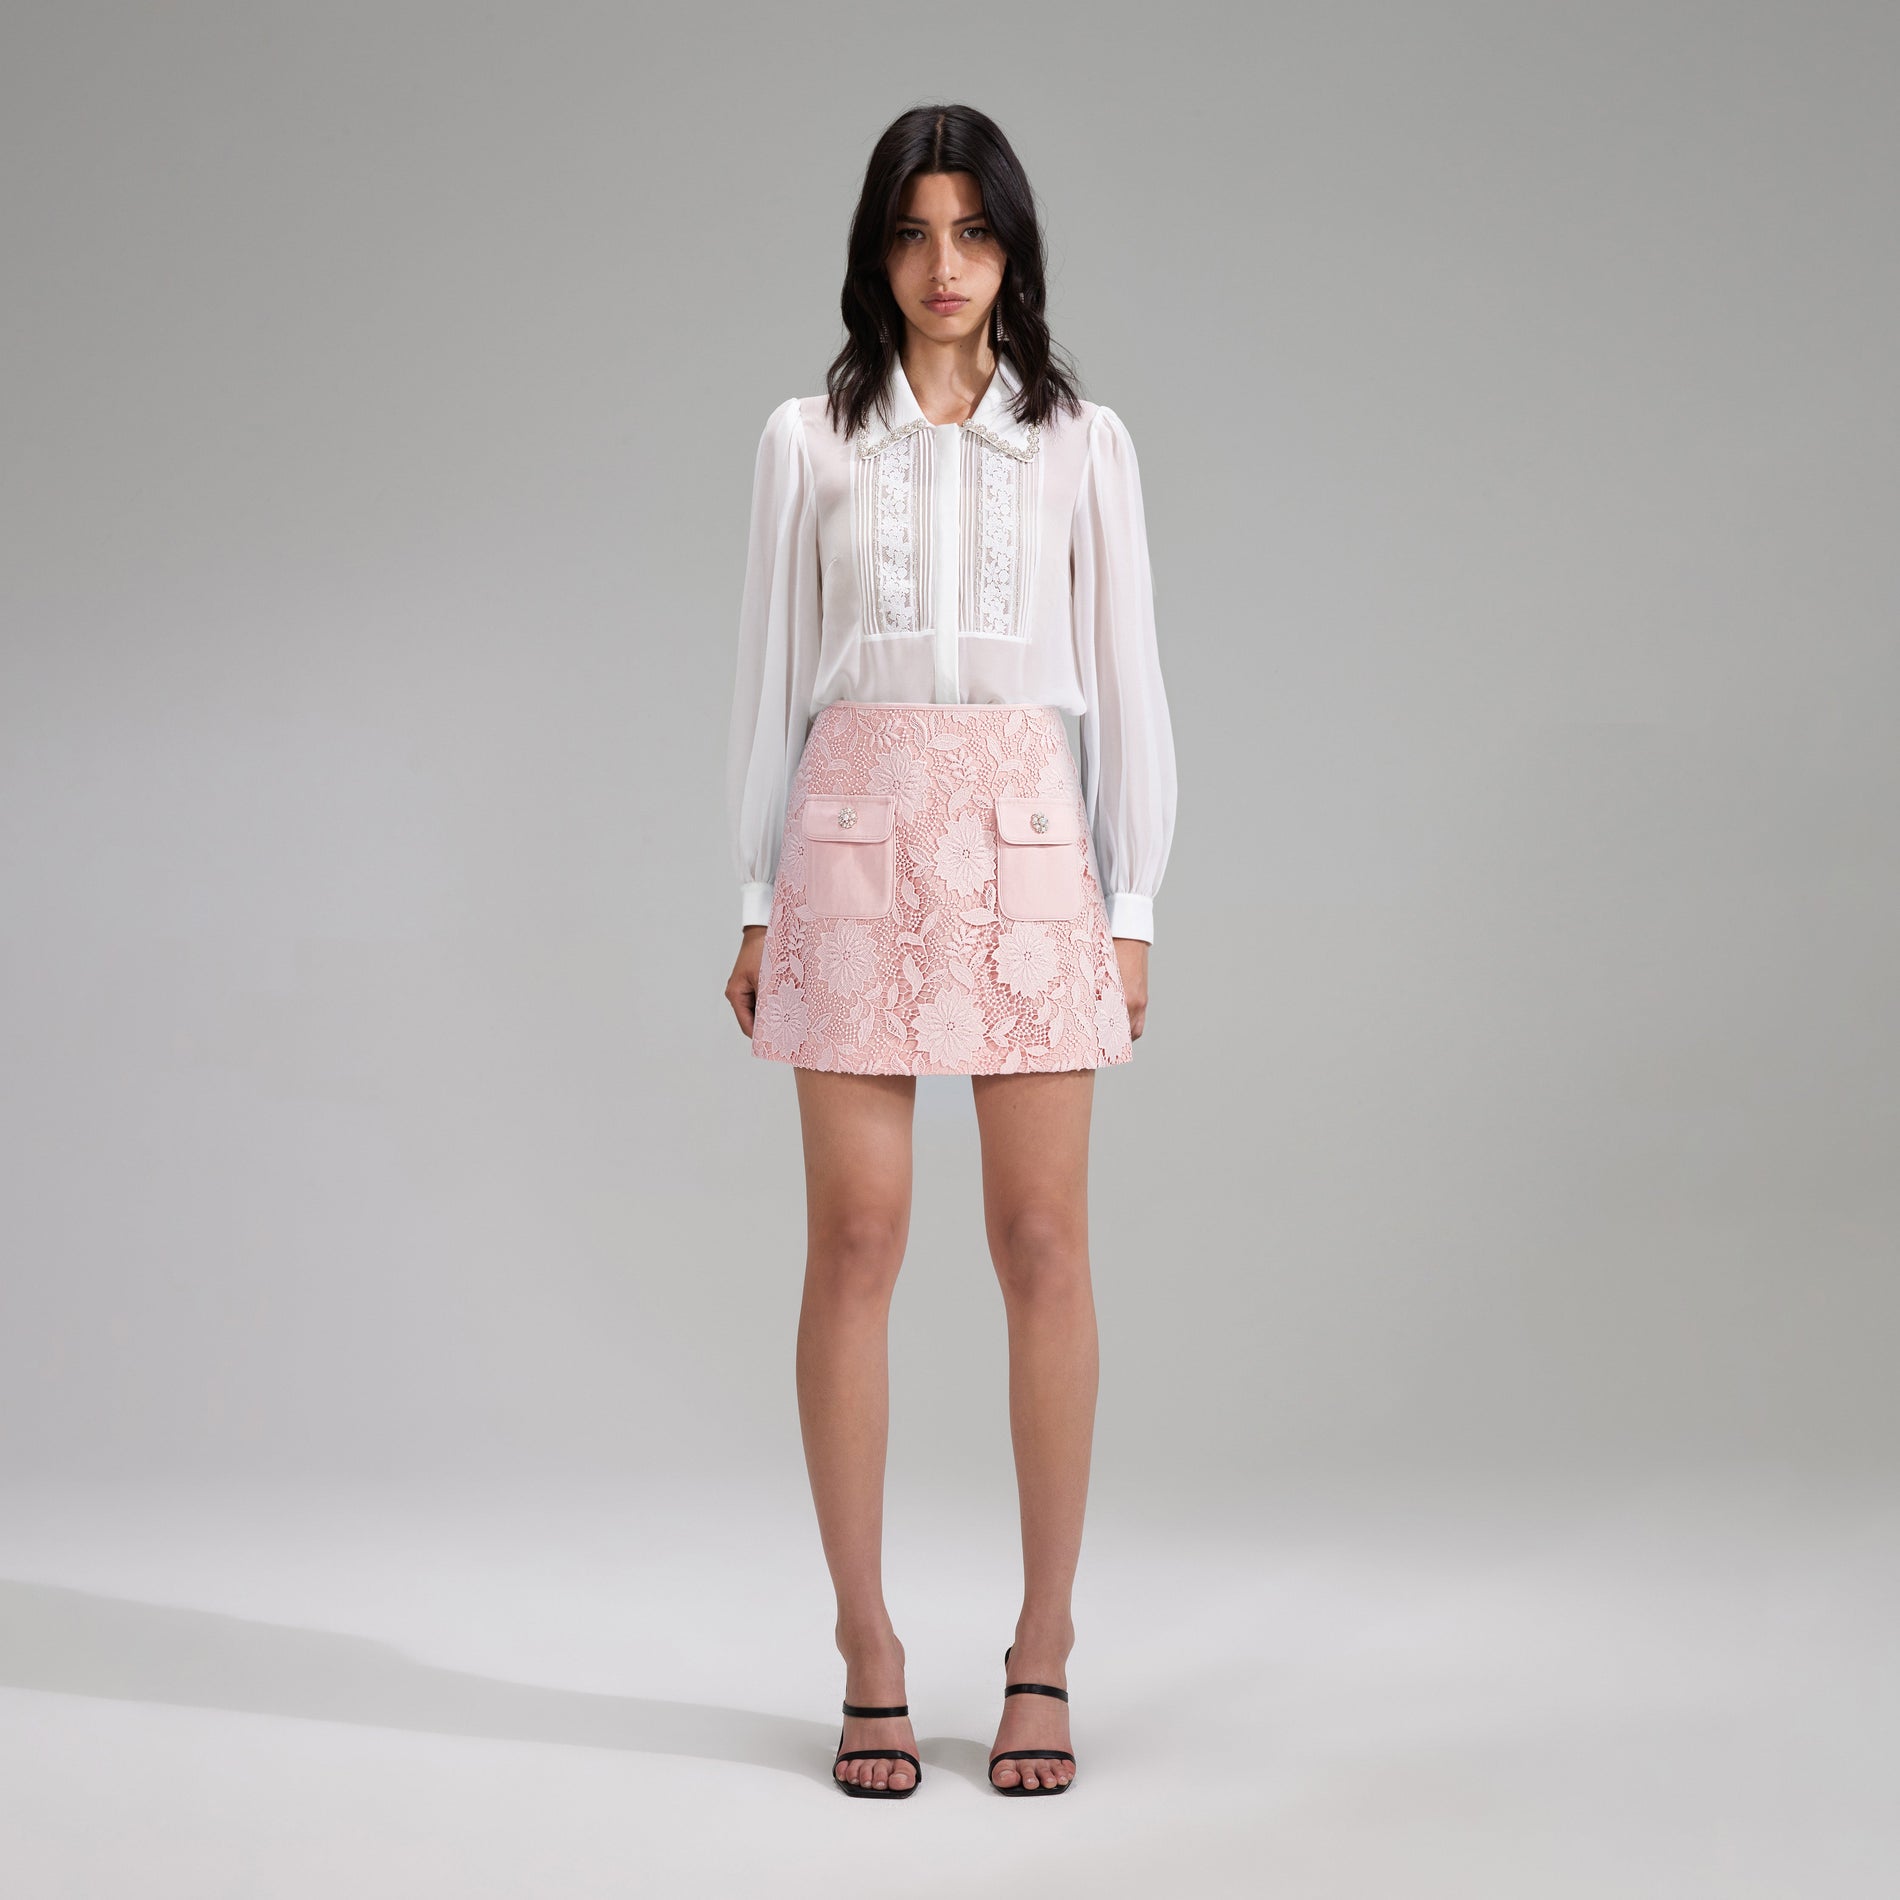 A woman wearing the Pink Guipure Lace Mini Skirt